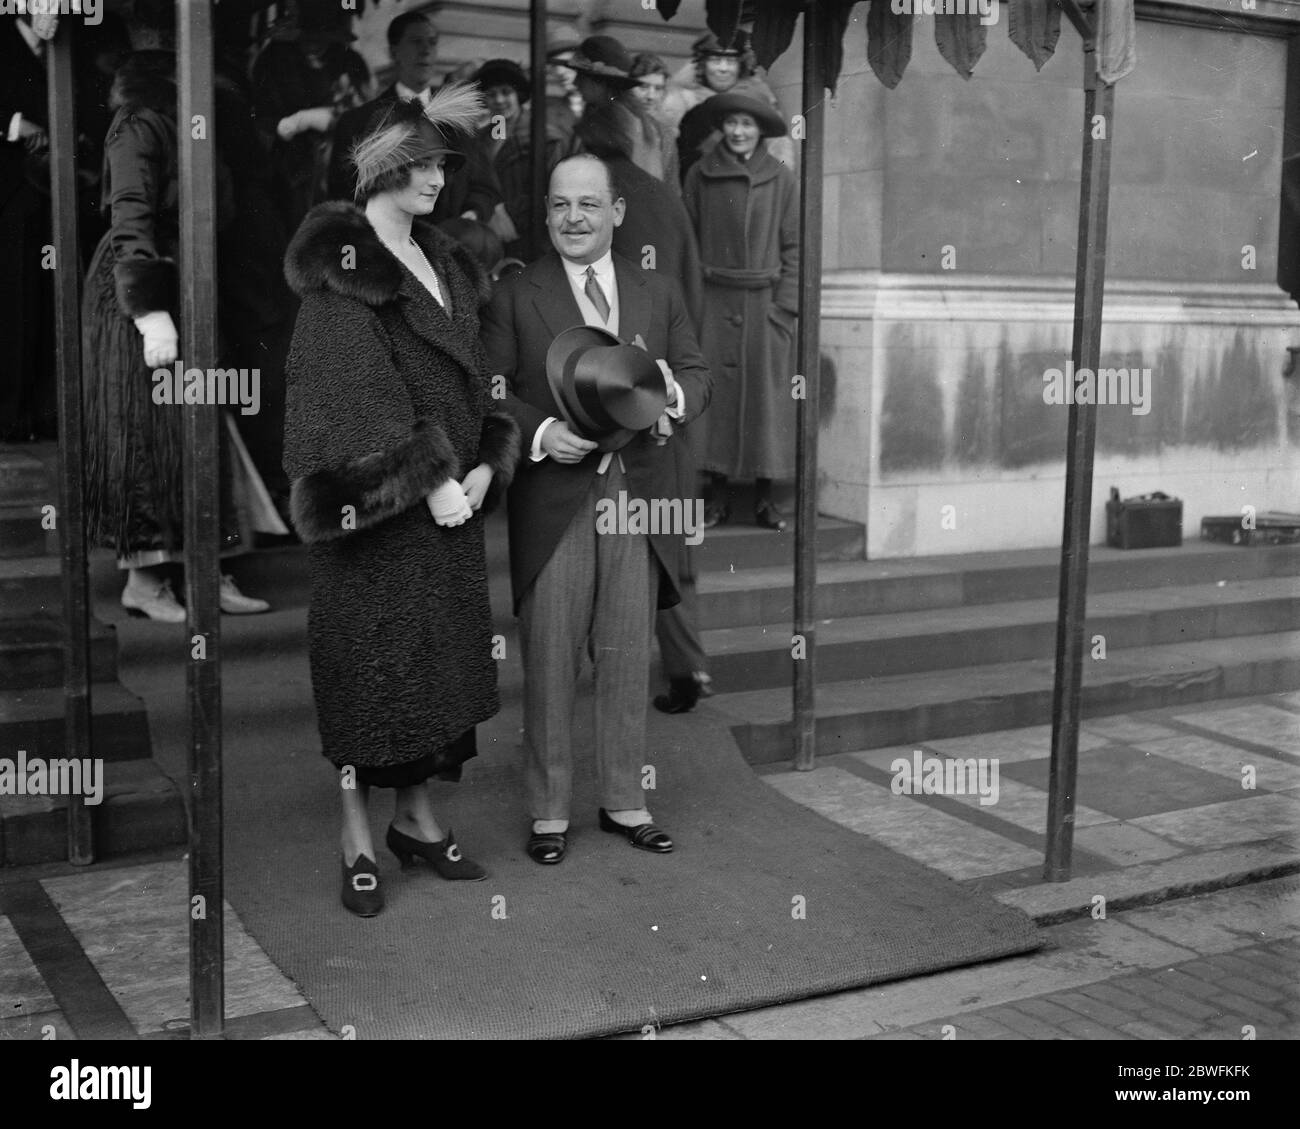 Wedding The marriage of Lady Muriel Bertie daughter of the Earl and Countess of Lindsay and Captain Liddell Grainger of Ayto Castle , Berwickshire took place at the Brompton Oratory , London on Friday . Bride and Bridegroom leaving the church 20 June 1922 Stock Photo